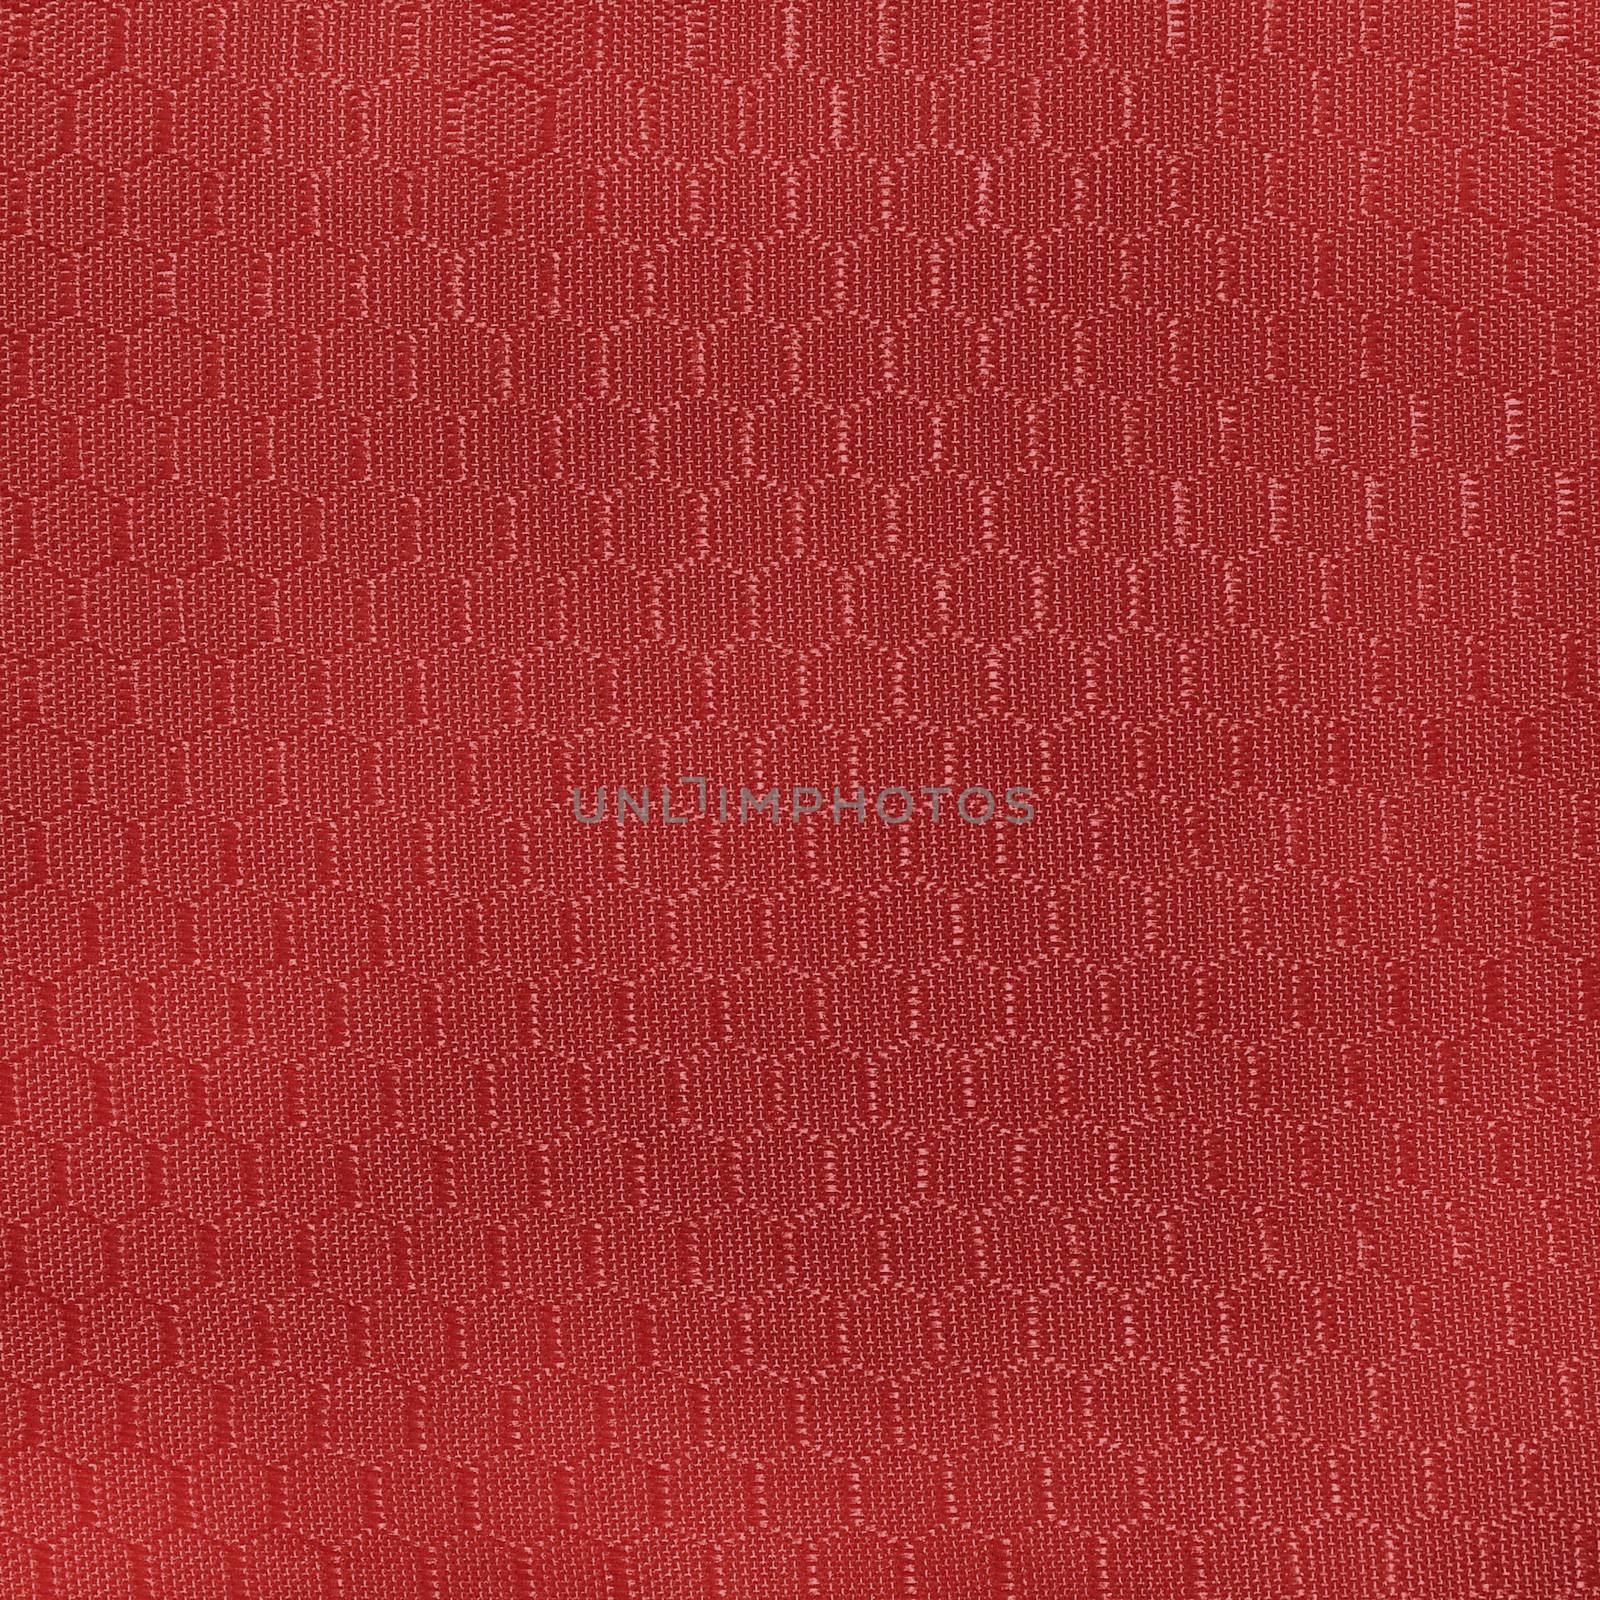 Fabric with a geometric pattern in the form of a diamond dark red.Texture or background